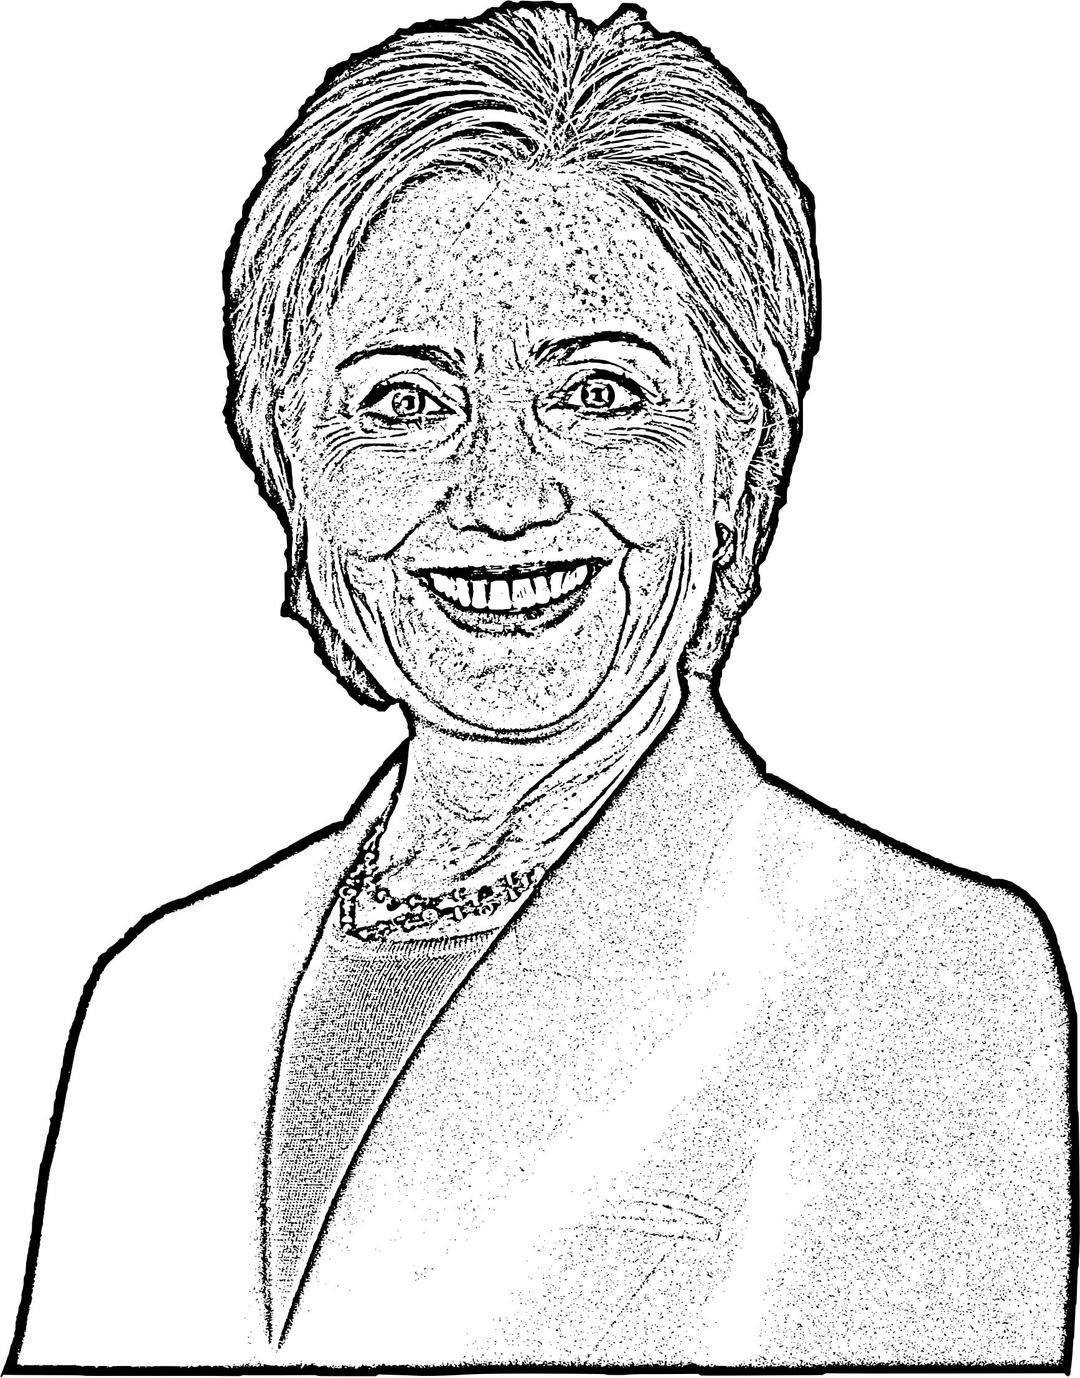 Hillary Clinton as President of the United States (Sketch) png transparent